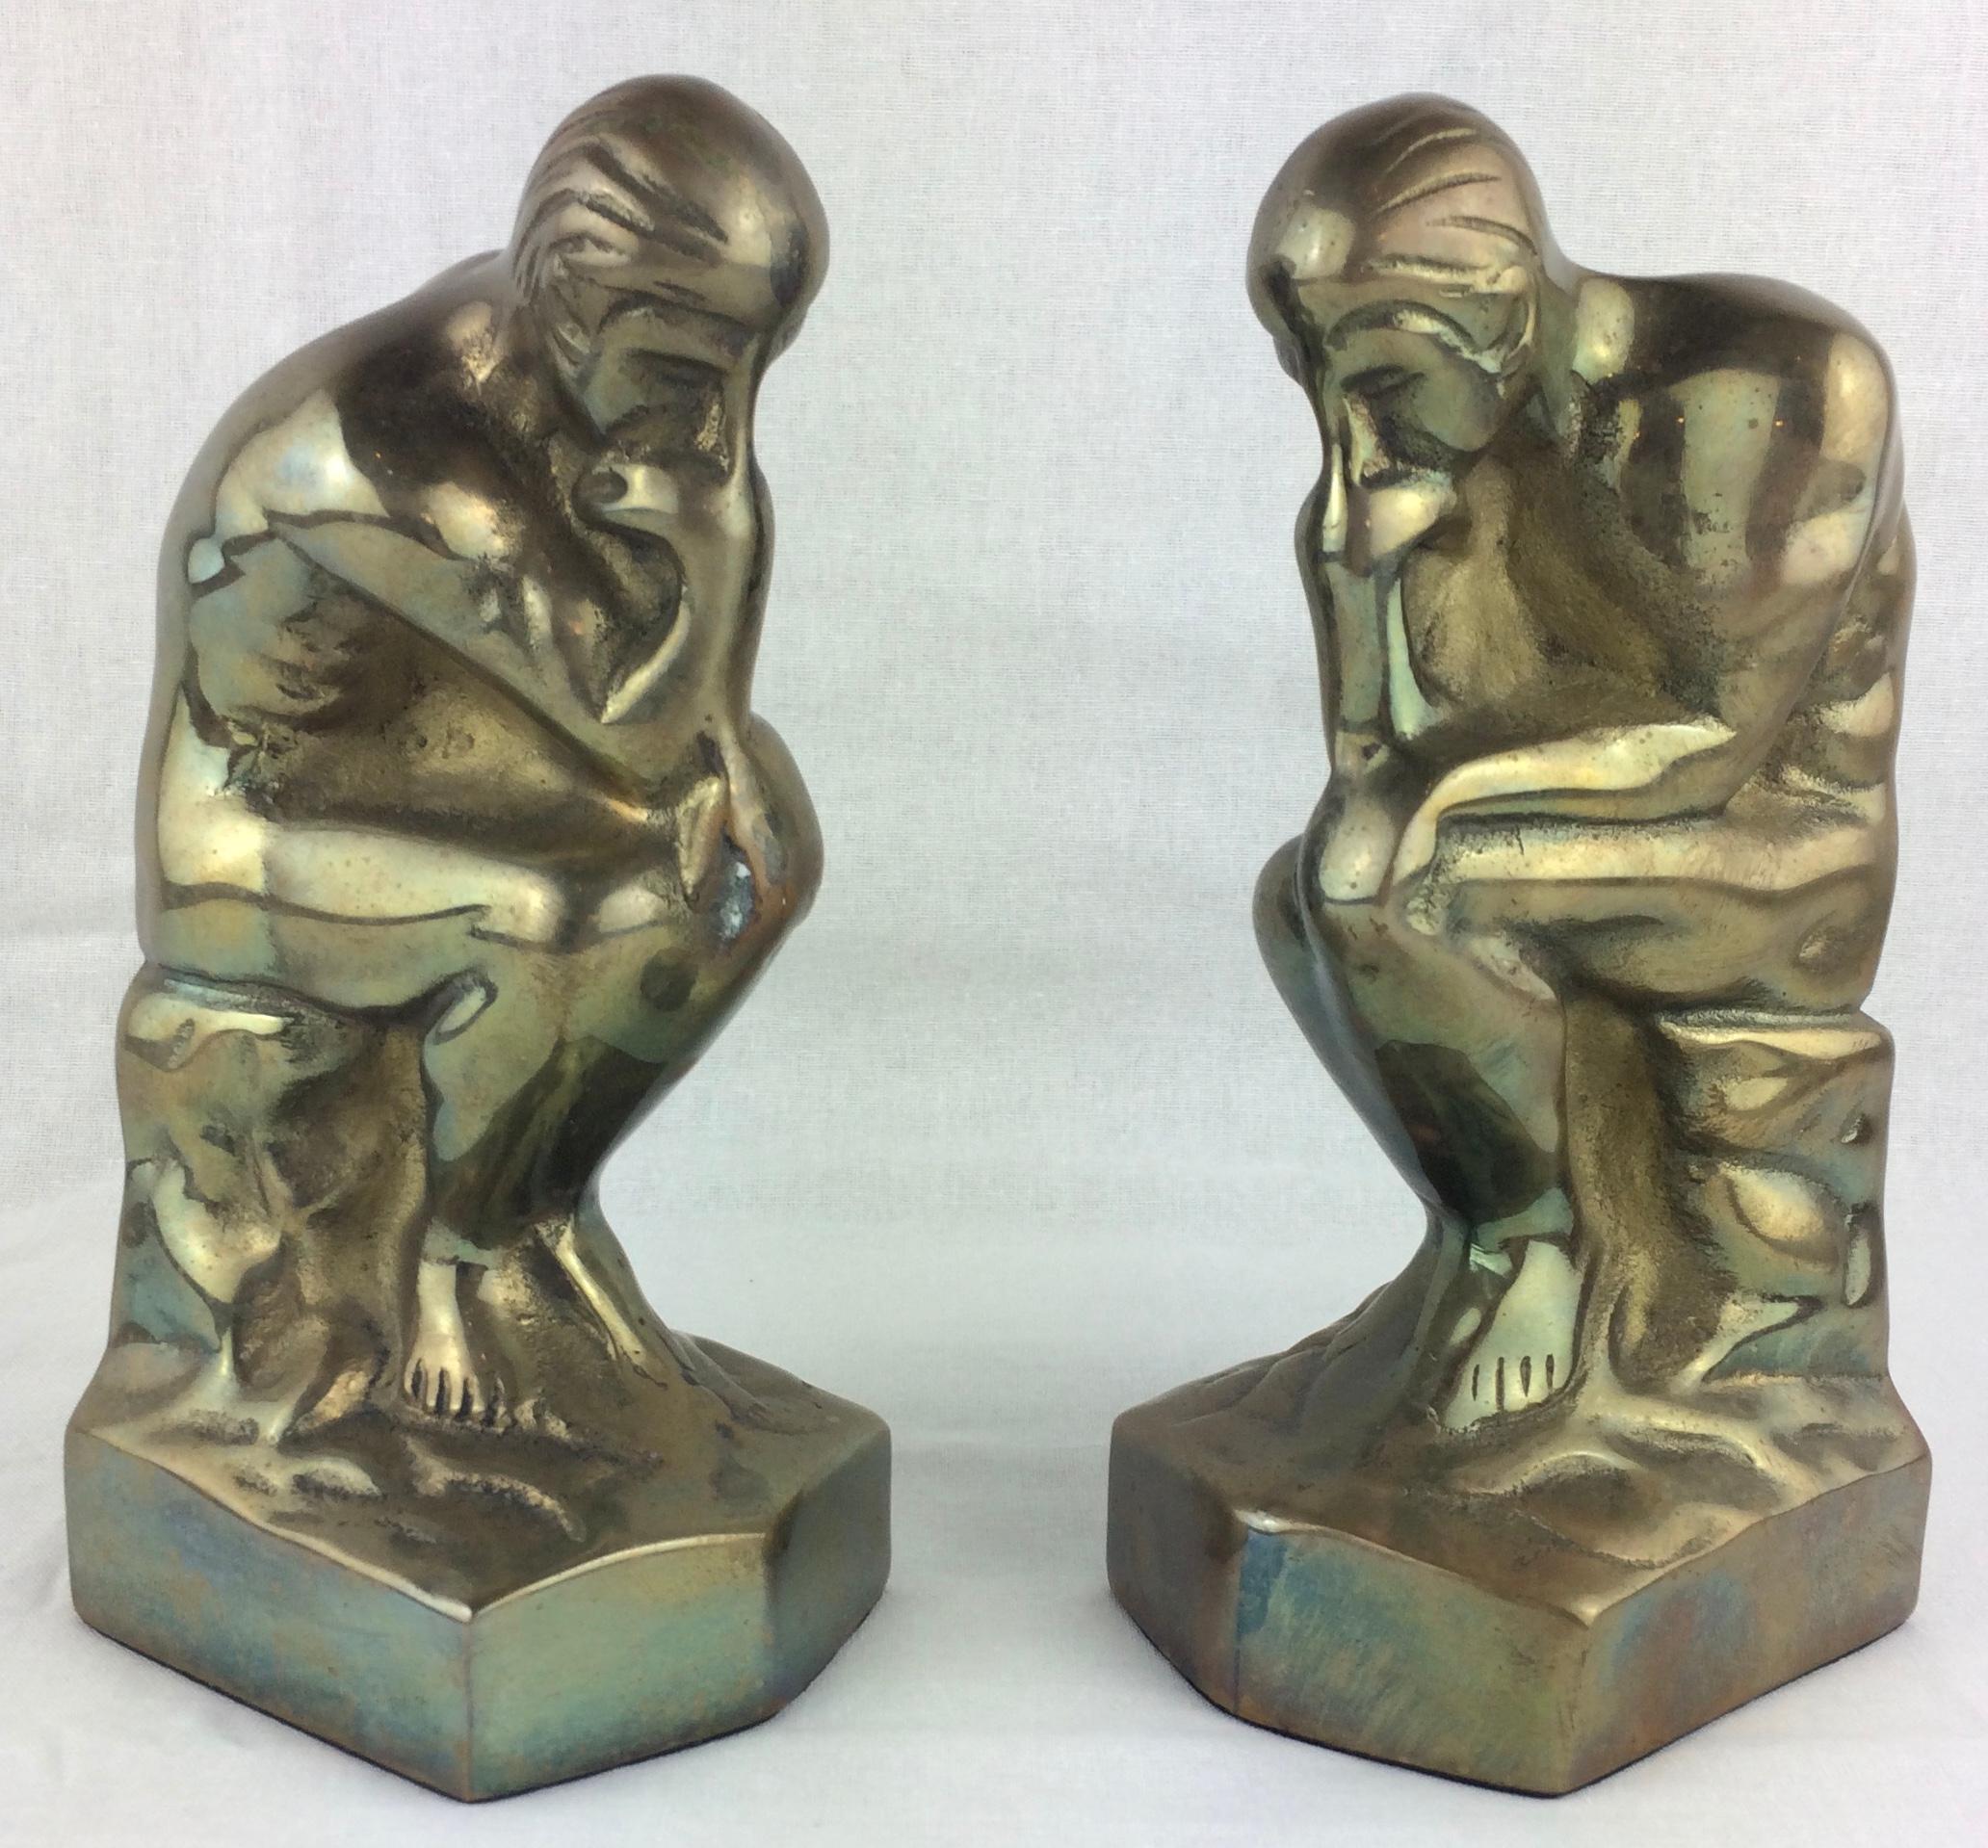 French Pair of Sculptural Art Deco Brass Bookends after Auguste Rodin The Thinker